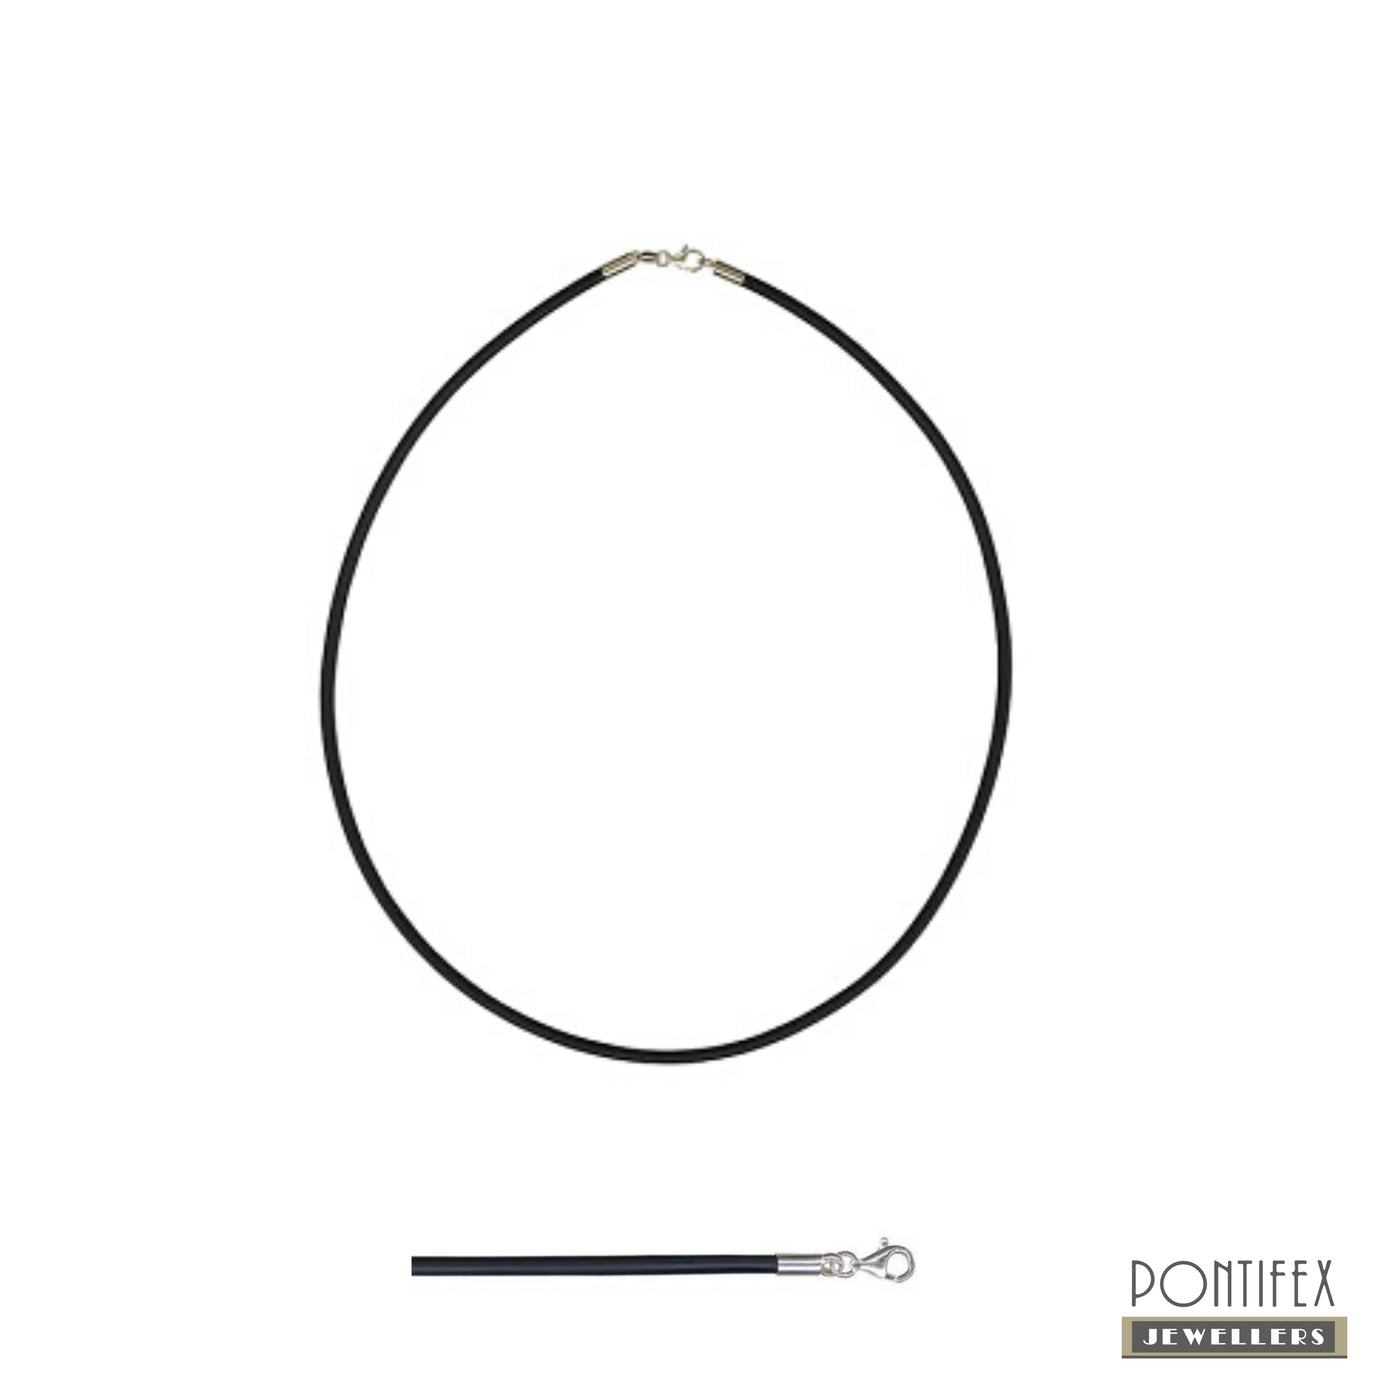 45cm Black Neoprene Necklace with Silver End